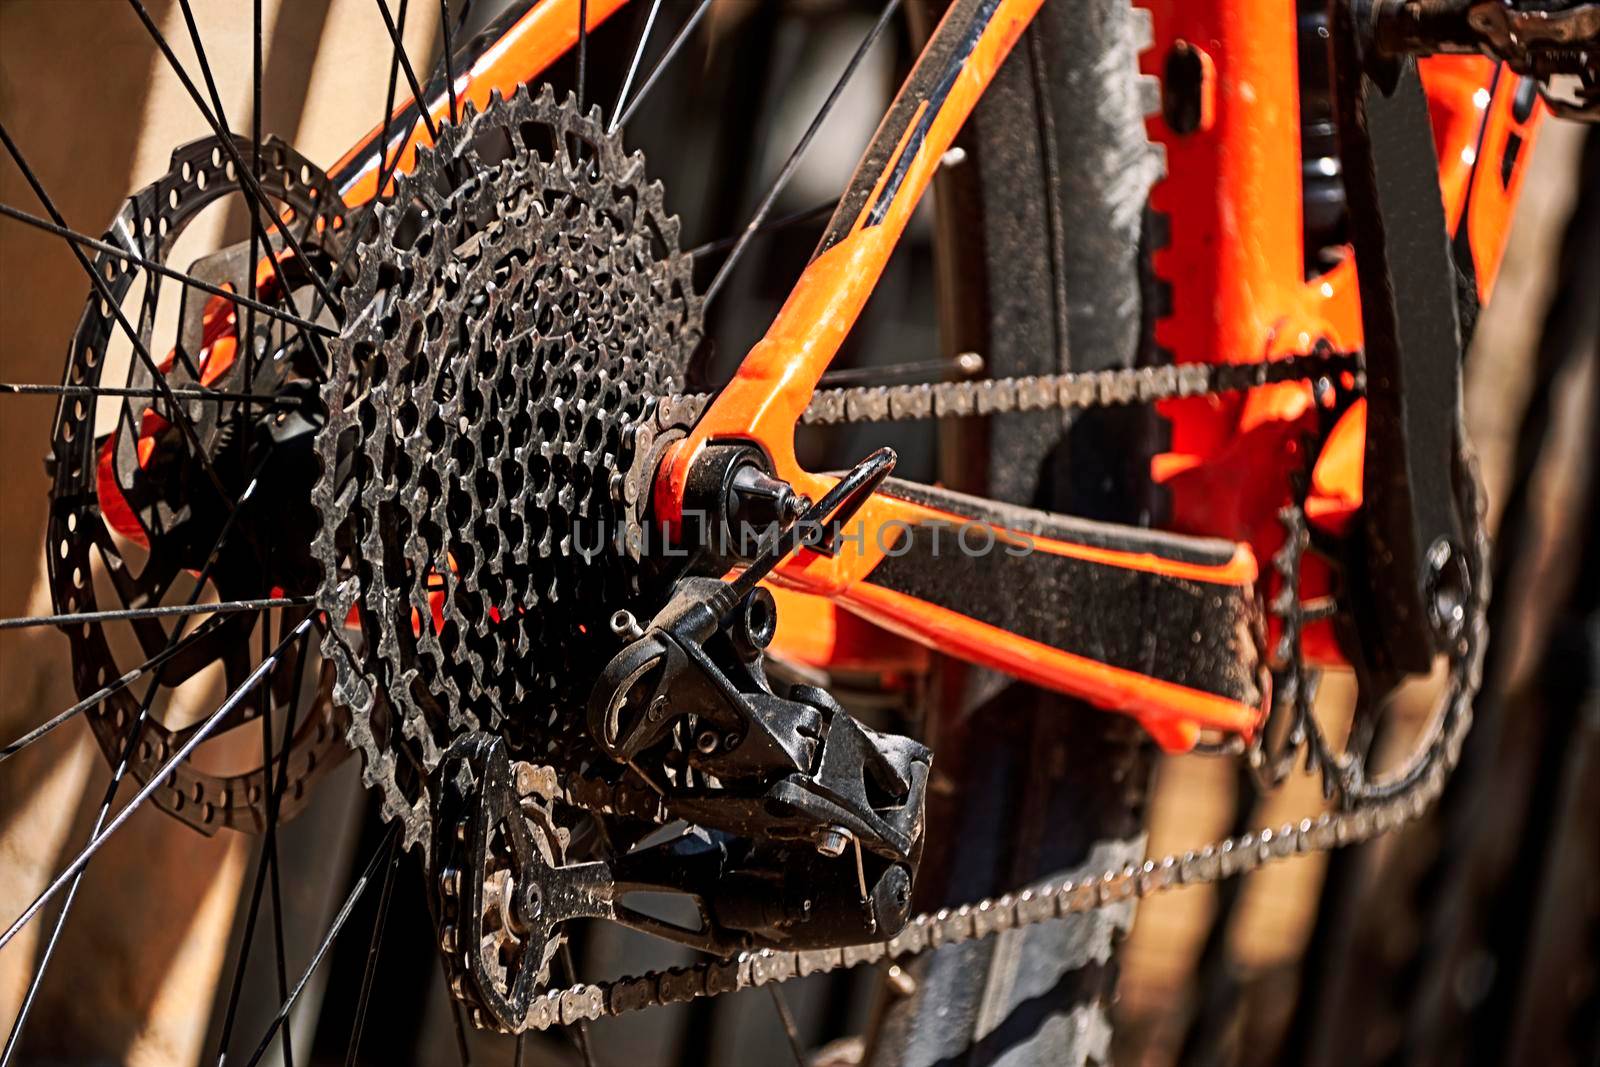 Bicycle rear wheel, wheel sprockets, and chain. Orange and black, out-of-focus background, pedal